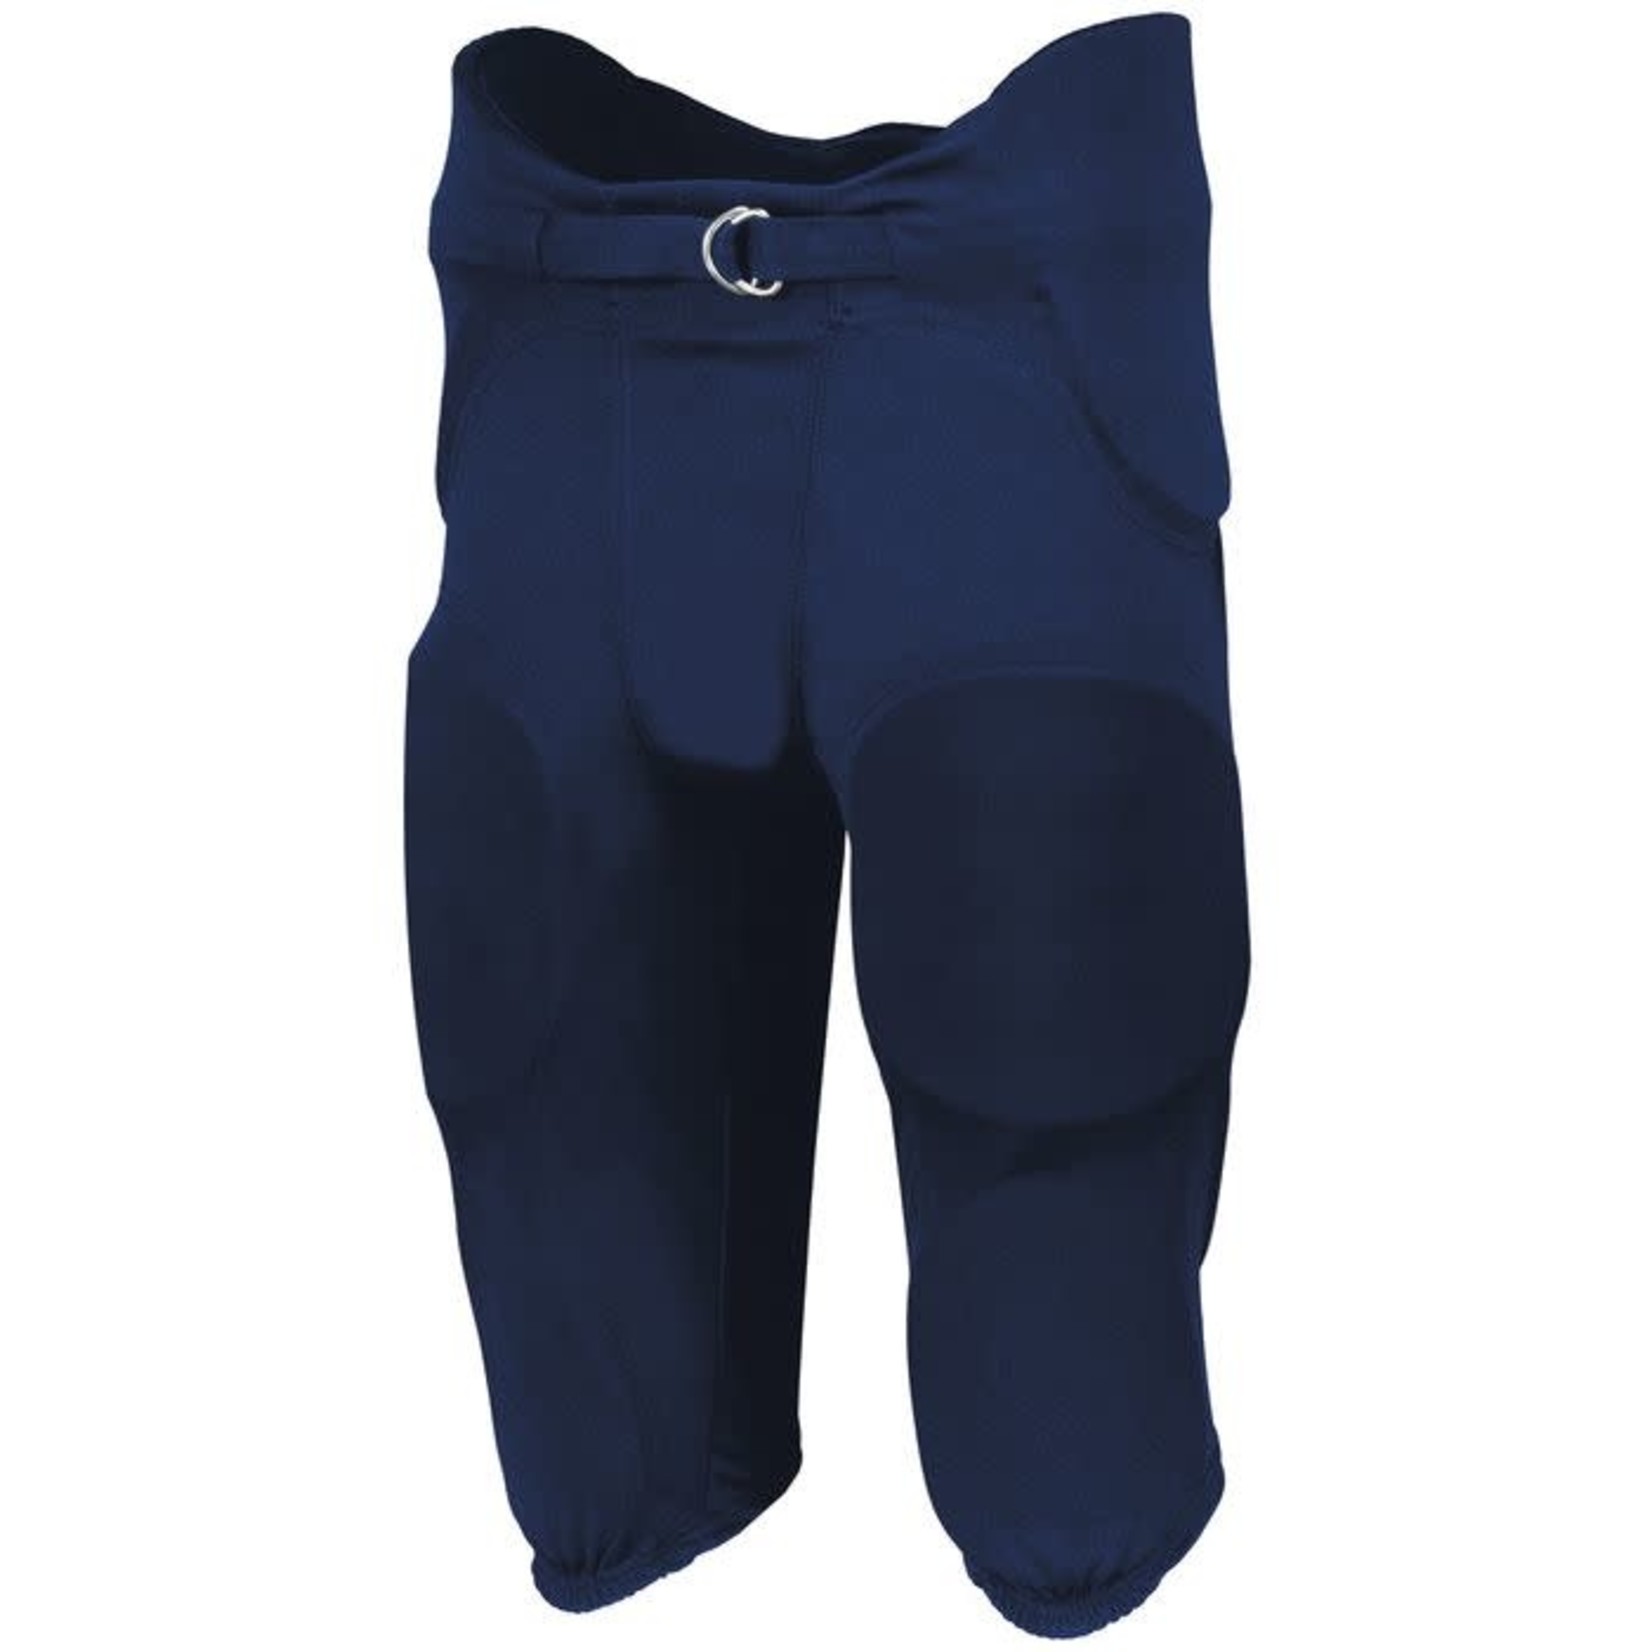 Russell Russell Youth Integrated Football Pants